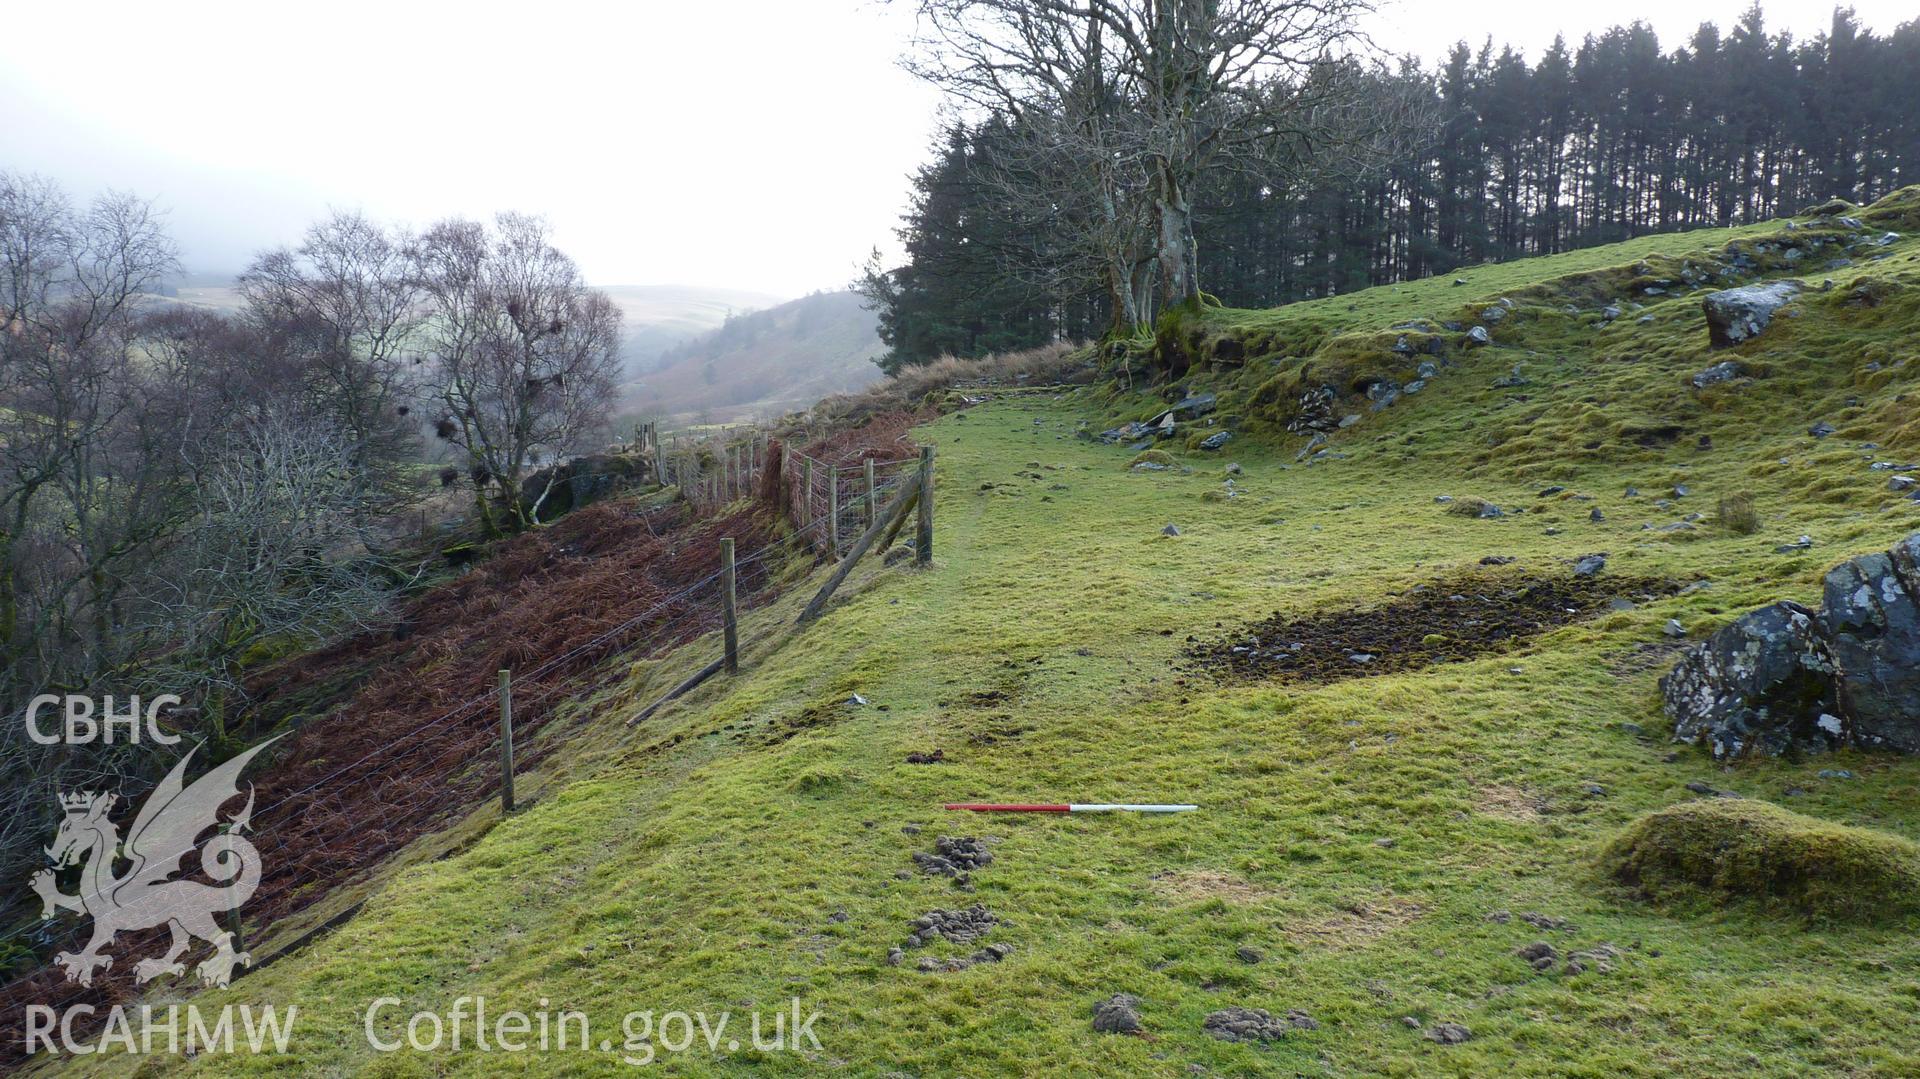 View along trackway with enclosure to the right. Part of metal mining complex. Looking south east. Photographed for Archaeological Desk Based Assessment of Afon Claerwen, Elan Valley, Rhayader. Assessment by Archaeology Wales in 2017-18. Project no. 2573.